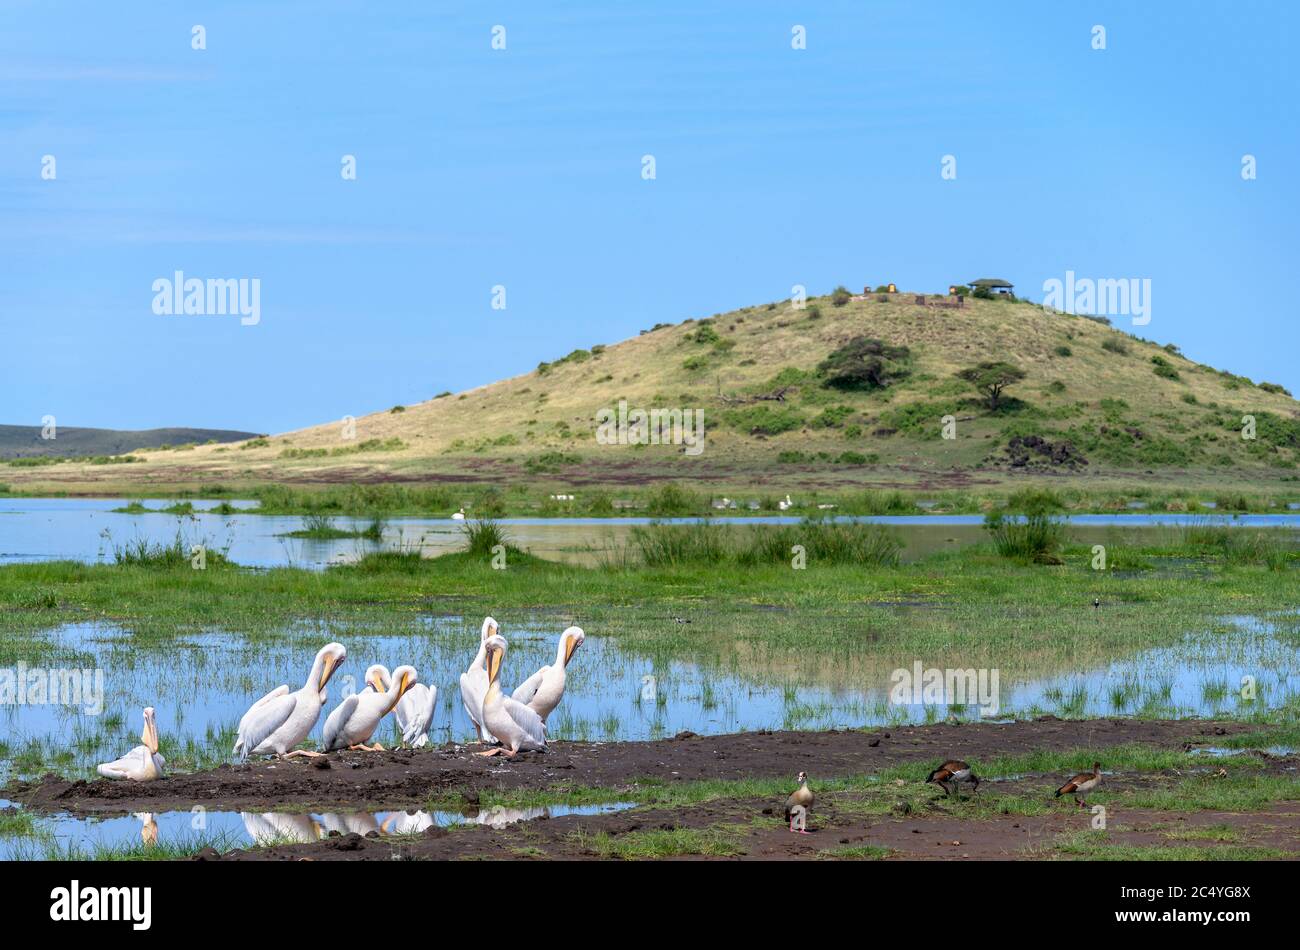 Great white pelicans (Pelecanus onocrotalus) in front of Observation Hill (Normatior), Amboseli National Park, Kenya, Africa Stock Photo